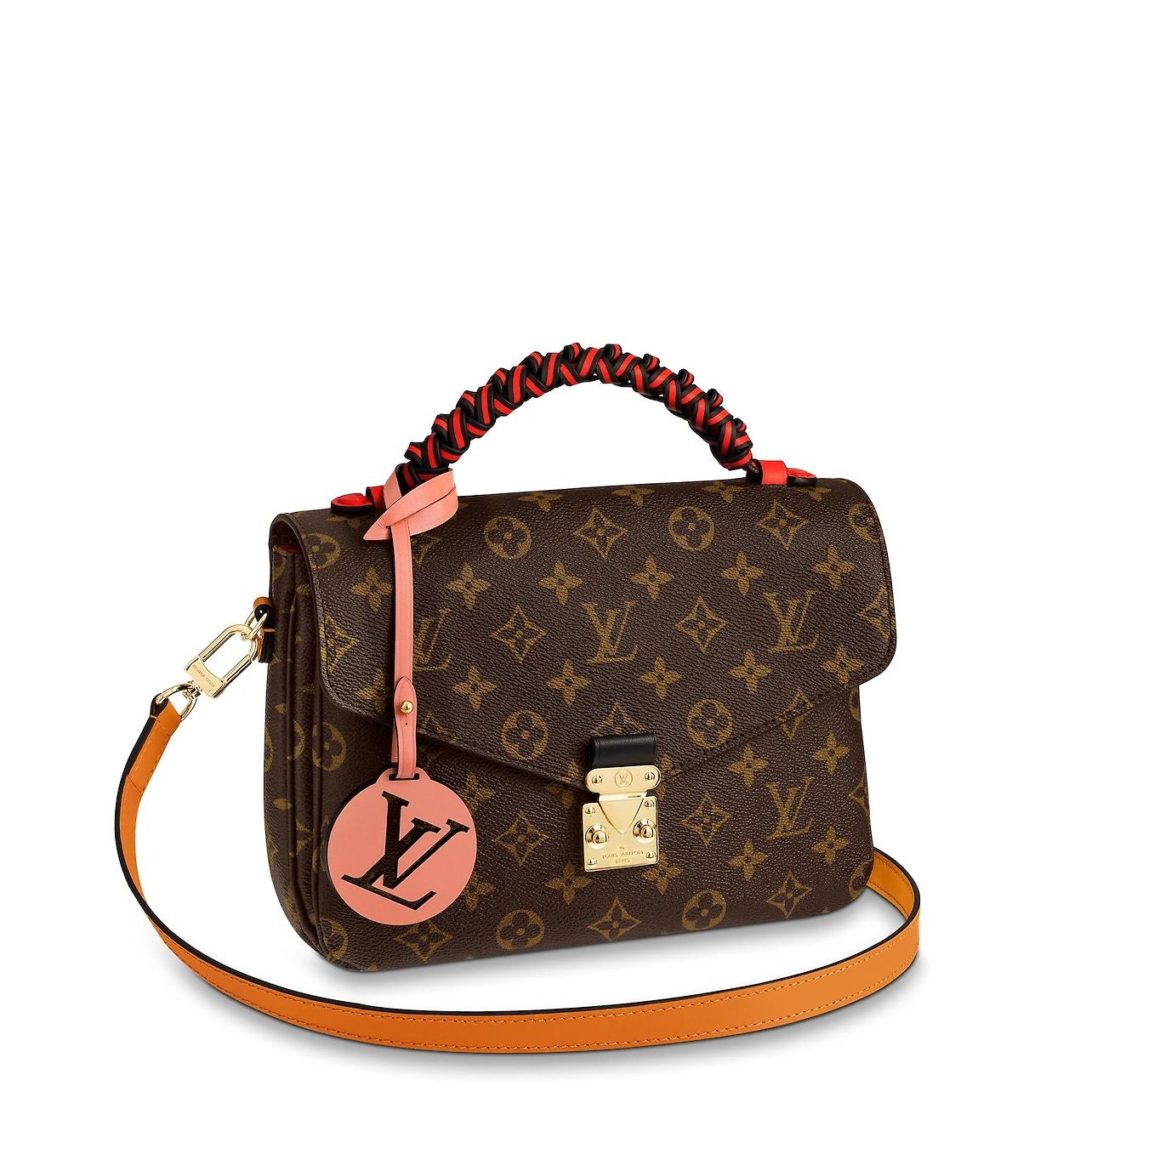 Imagination inspired by Louis Vuitton - The Misk Shoppe